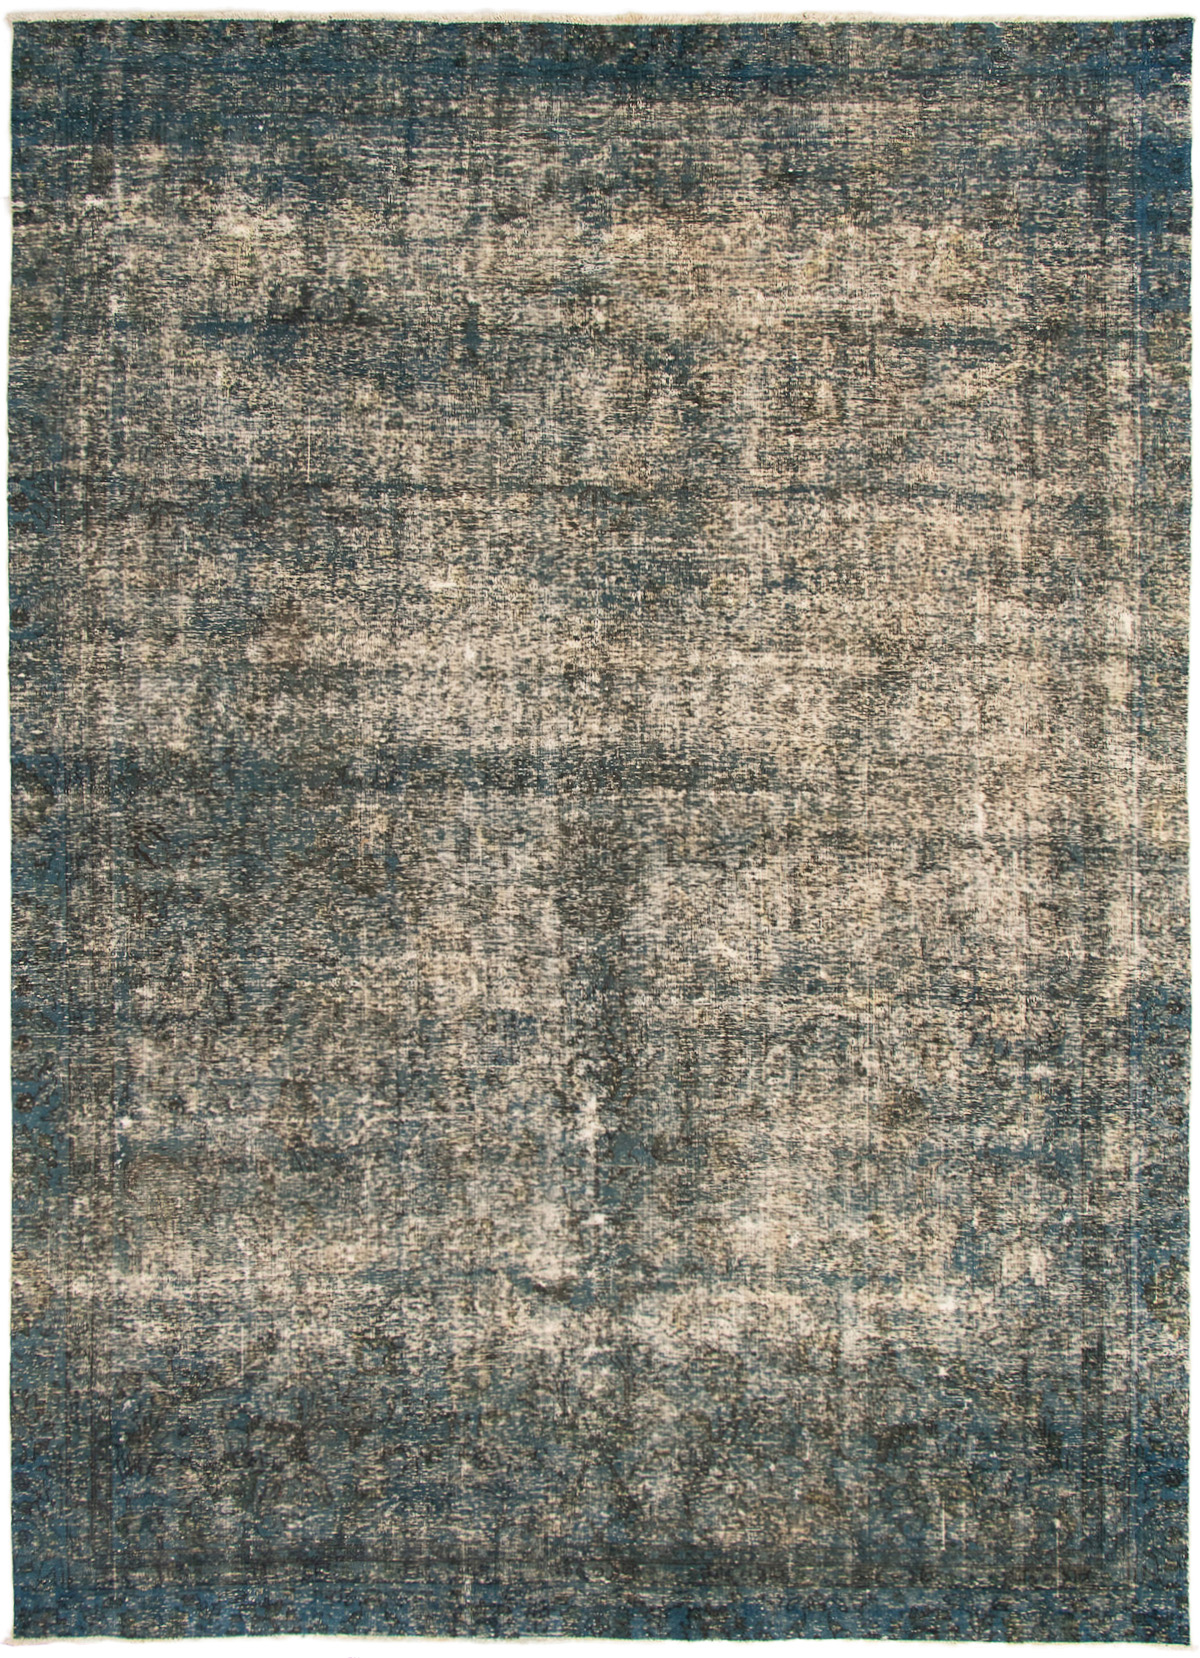 Hand-knotted Color Transition Cream, Dark Navy Wool Rug 8'7" x 12'0" Size: 8'7" x 12'0"  